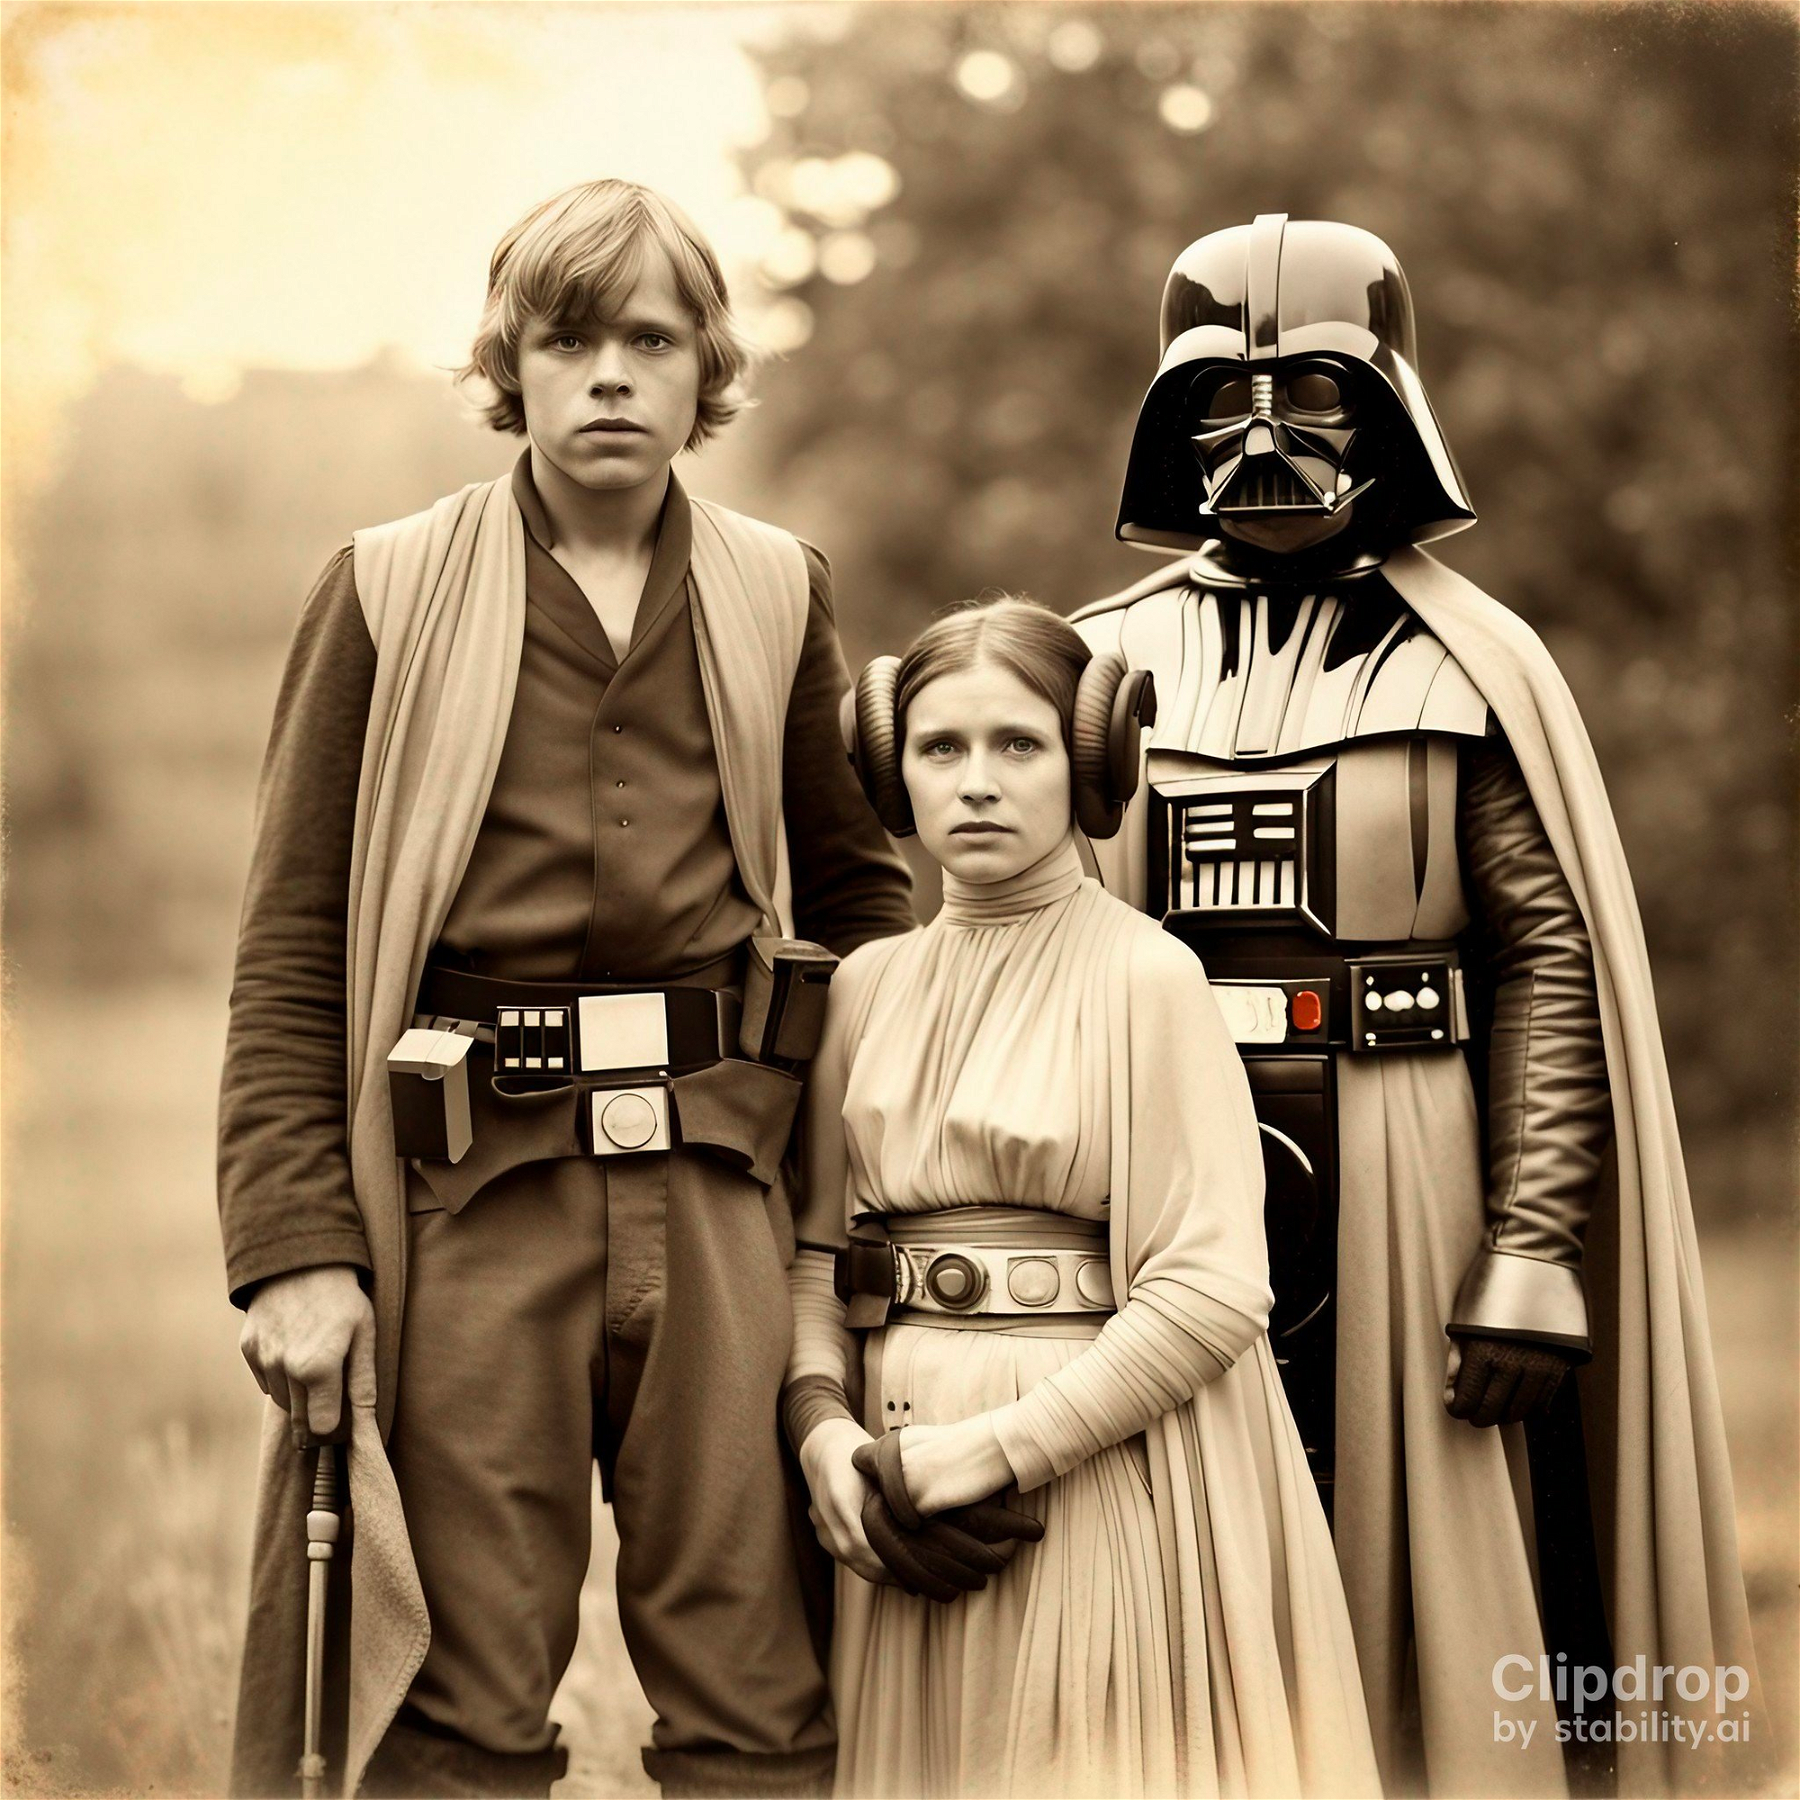 A black and white vintage, timeworn Skywalker family photograph from 1890, luke skywalker, princess leia and Darth Vader, rural clothing, ultra-detailed, 8k, slightly sepia tone